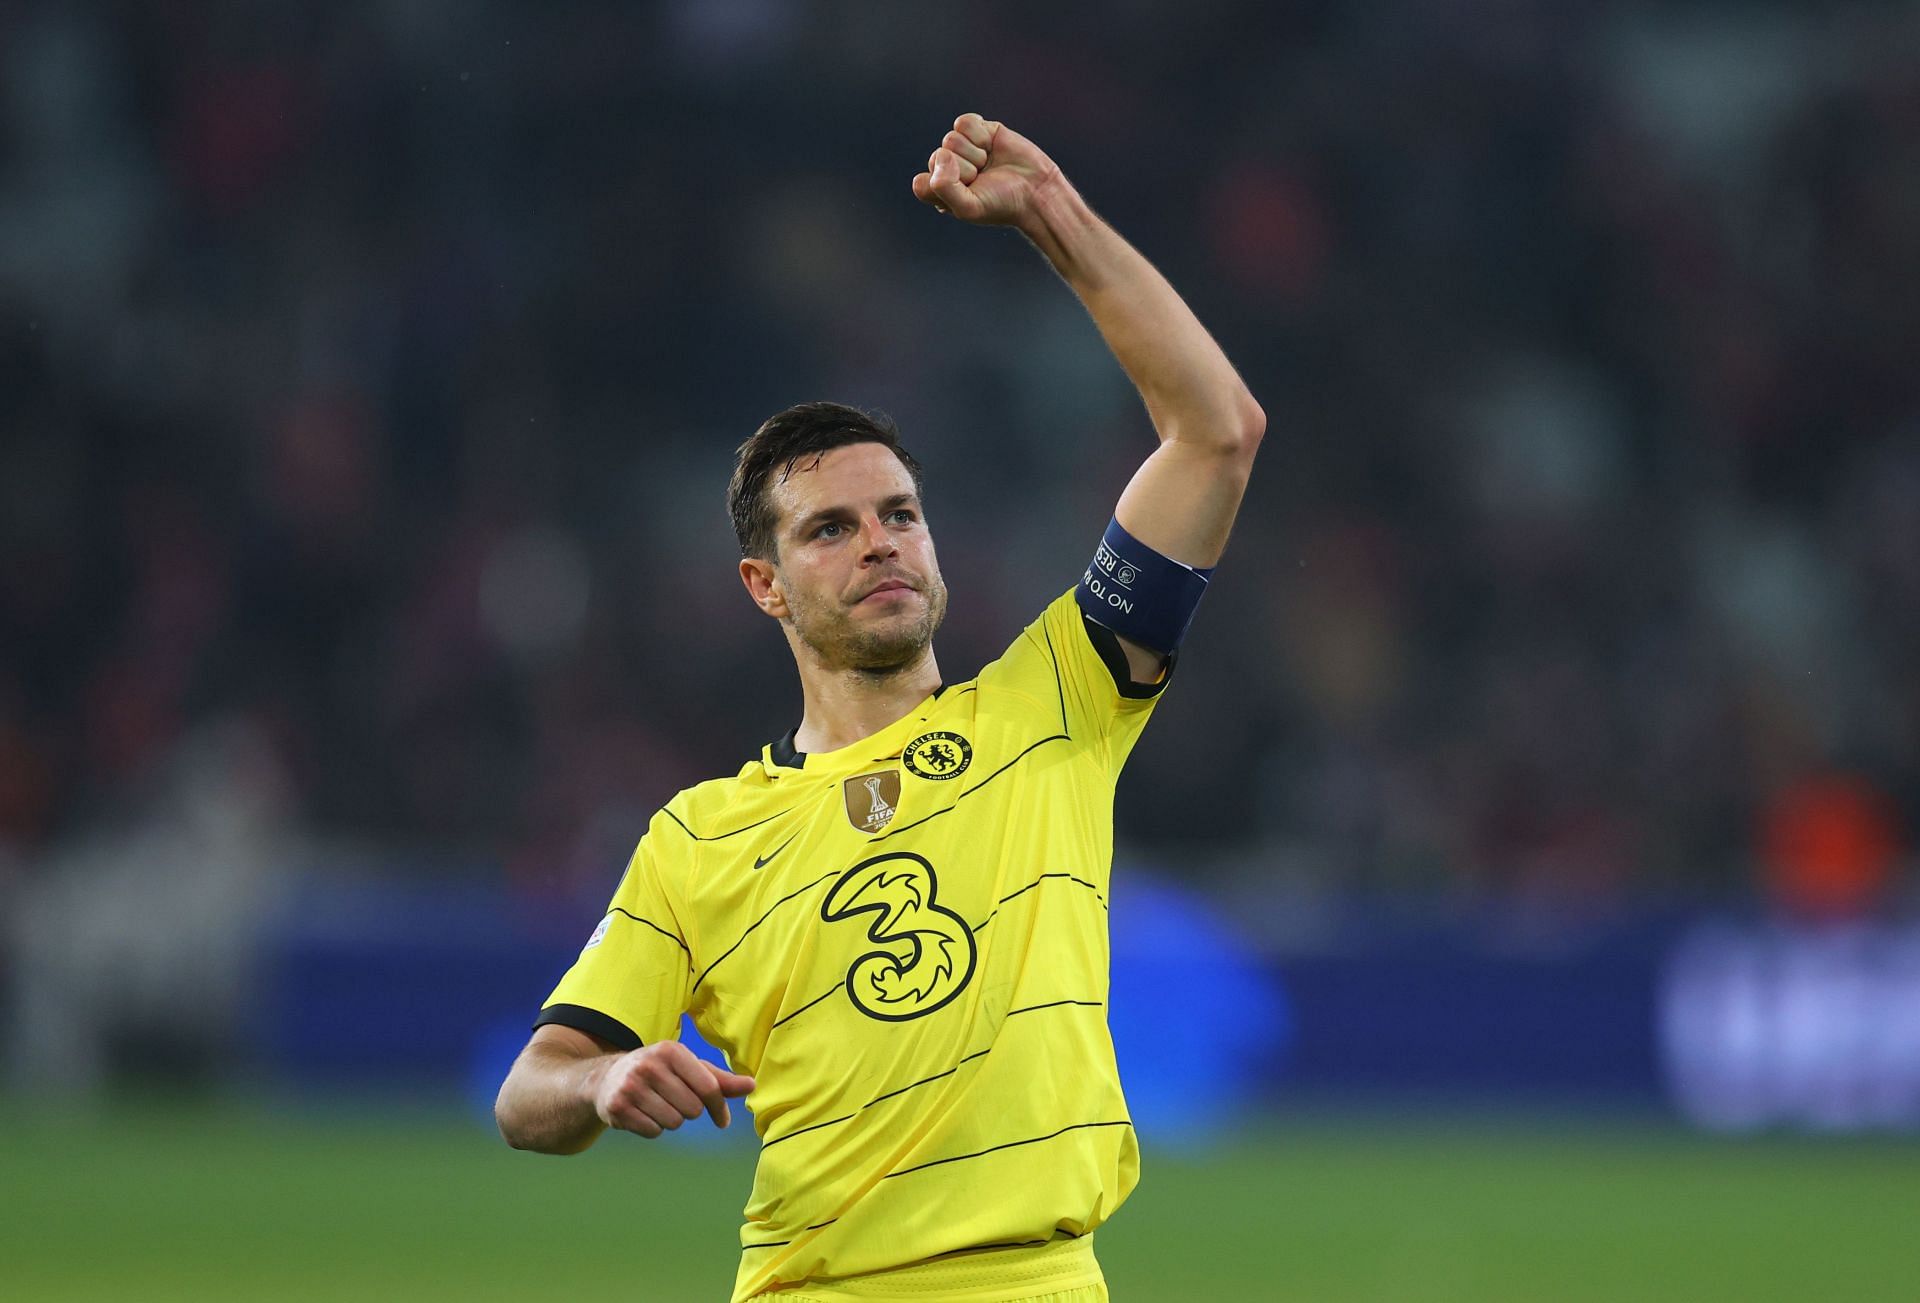 Azpilicueta is the current captain of the Blues